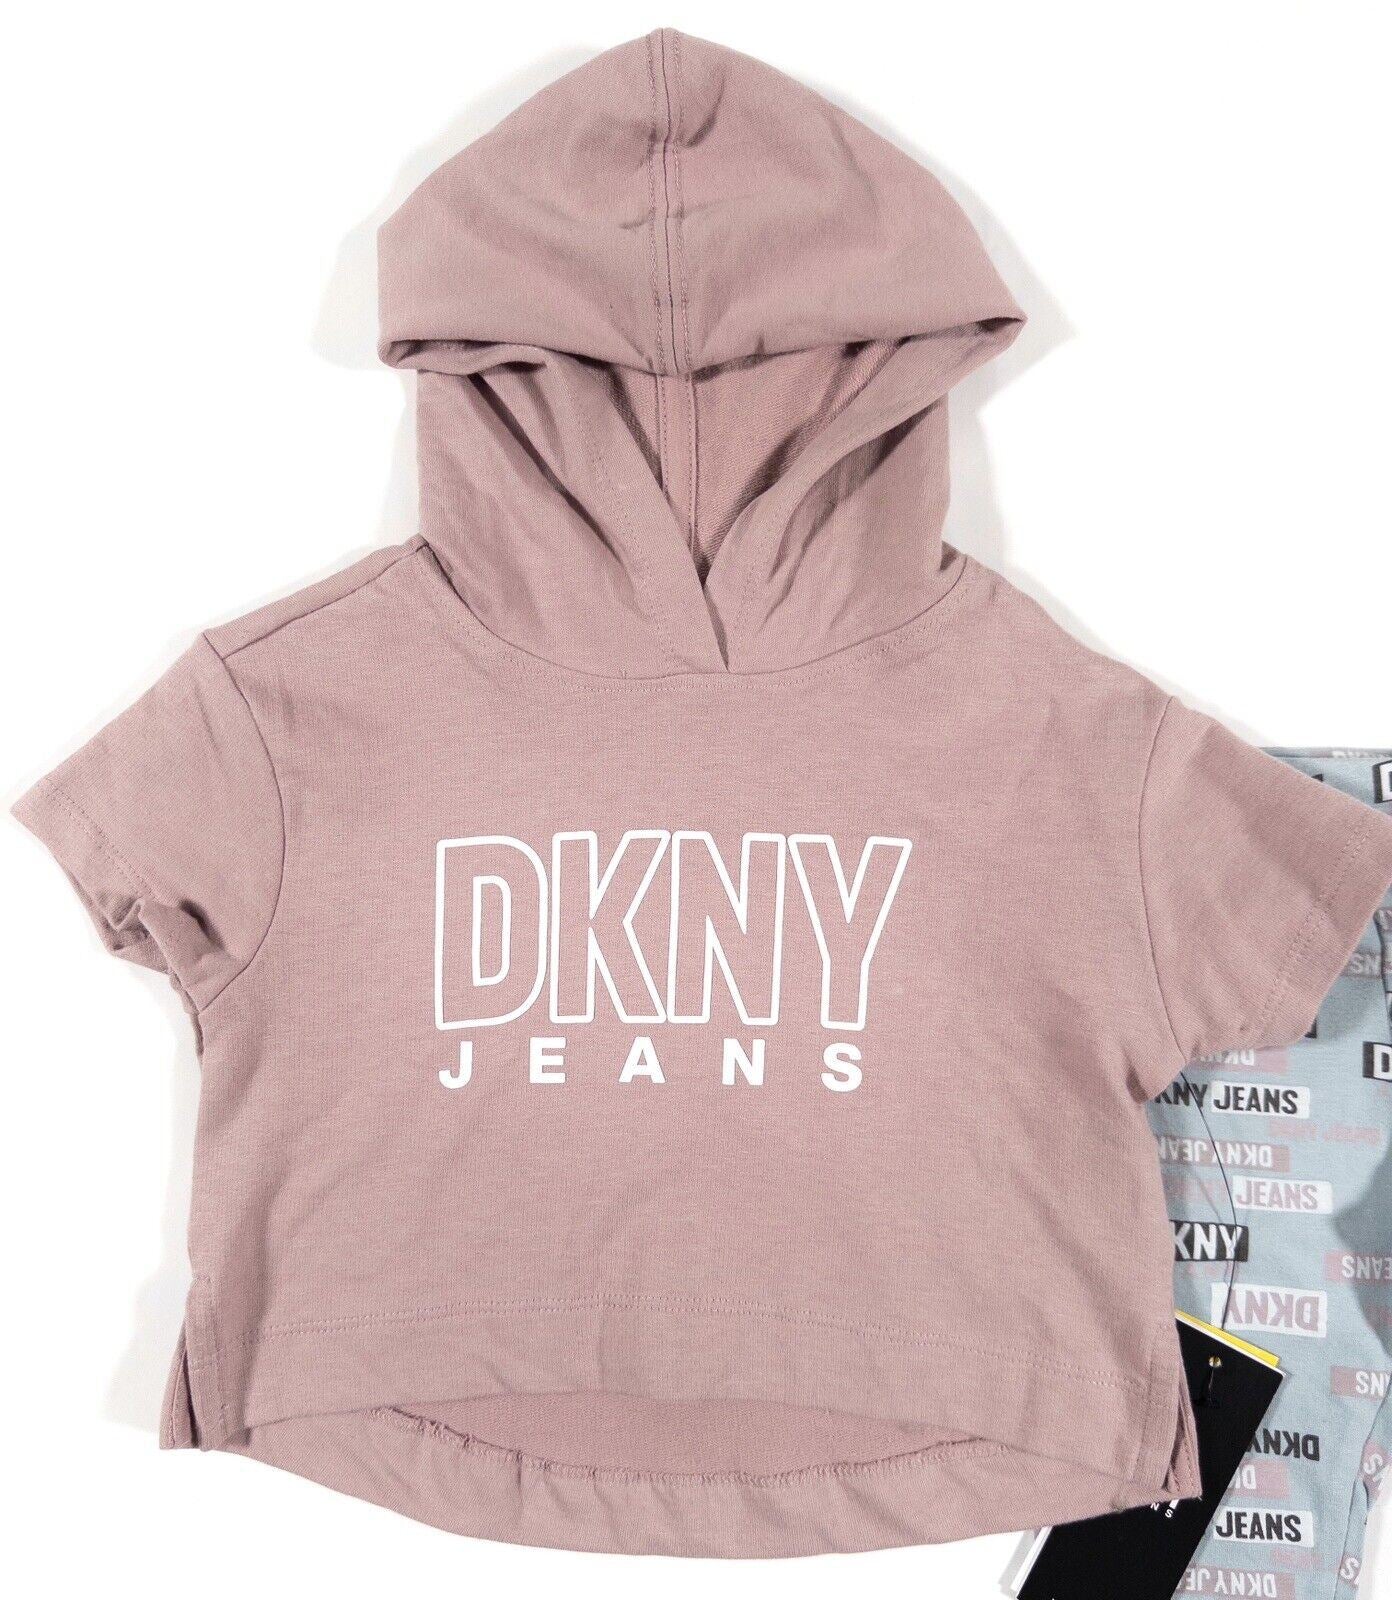 DKNY Infant Girls Hooded Top Trousers Leggings Pink Blue Size UK 18 Months